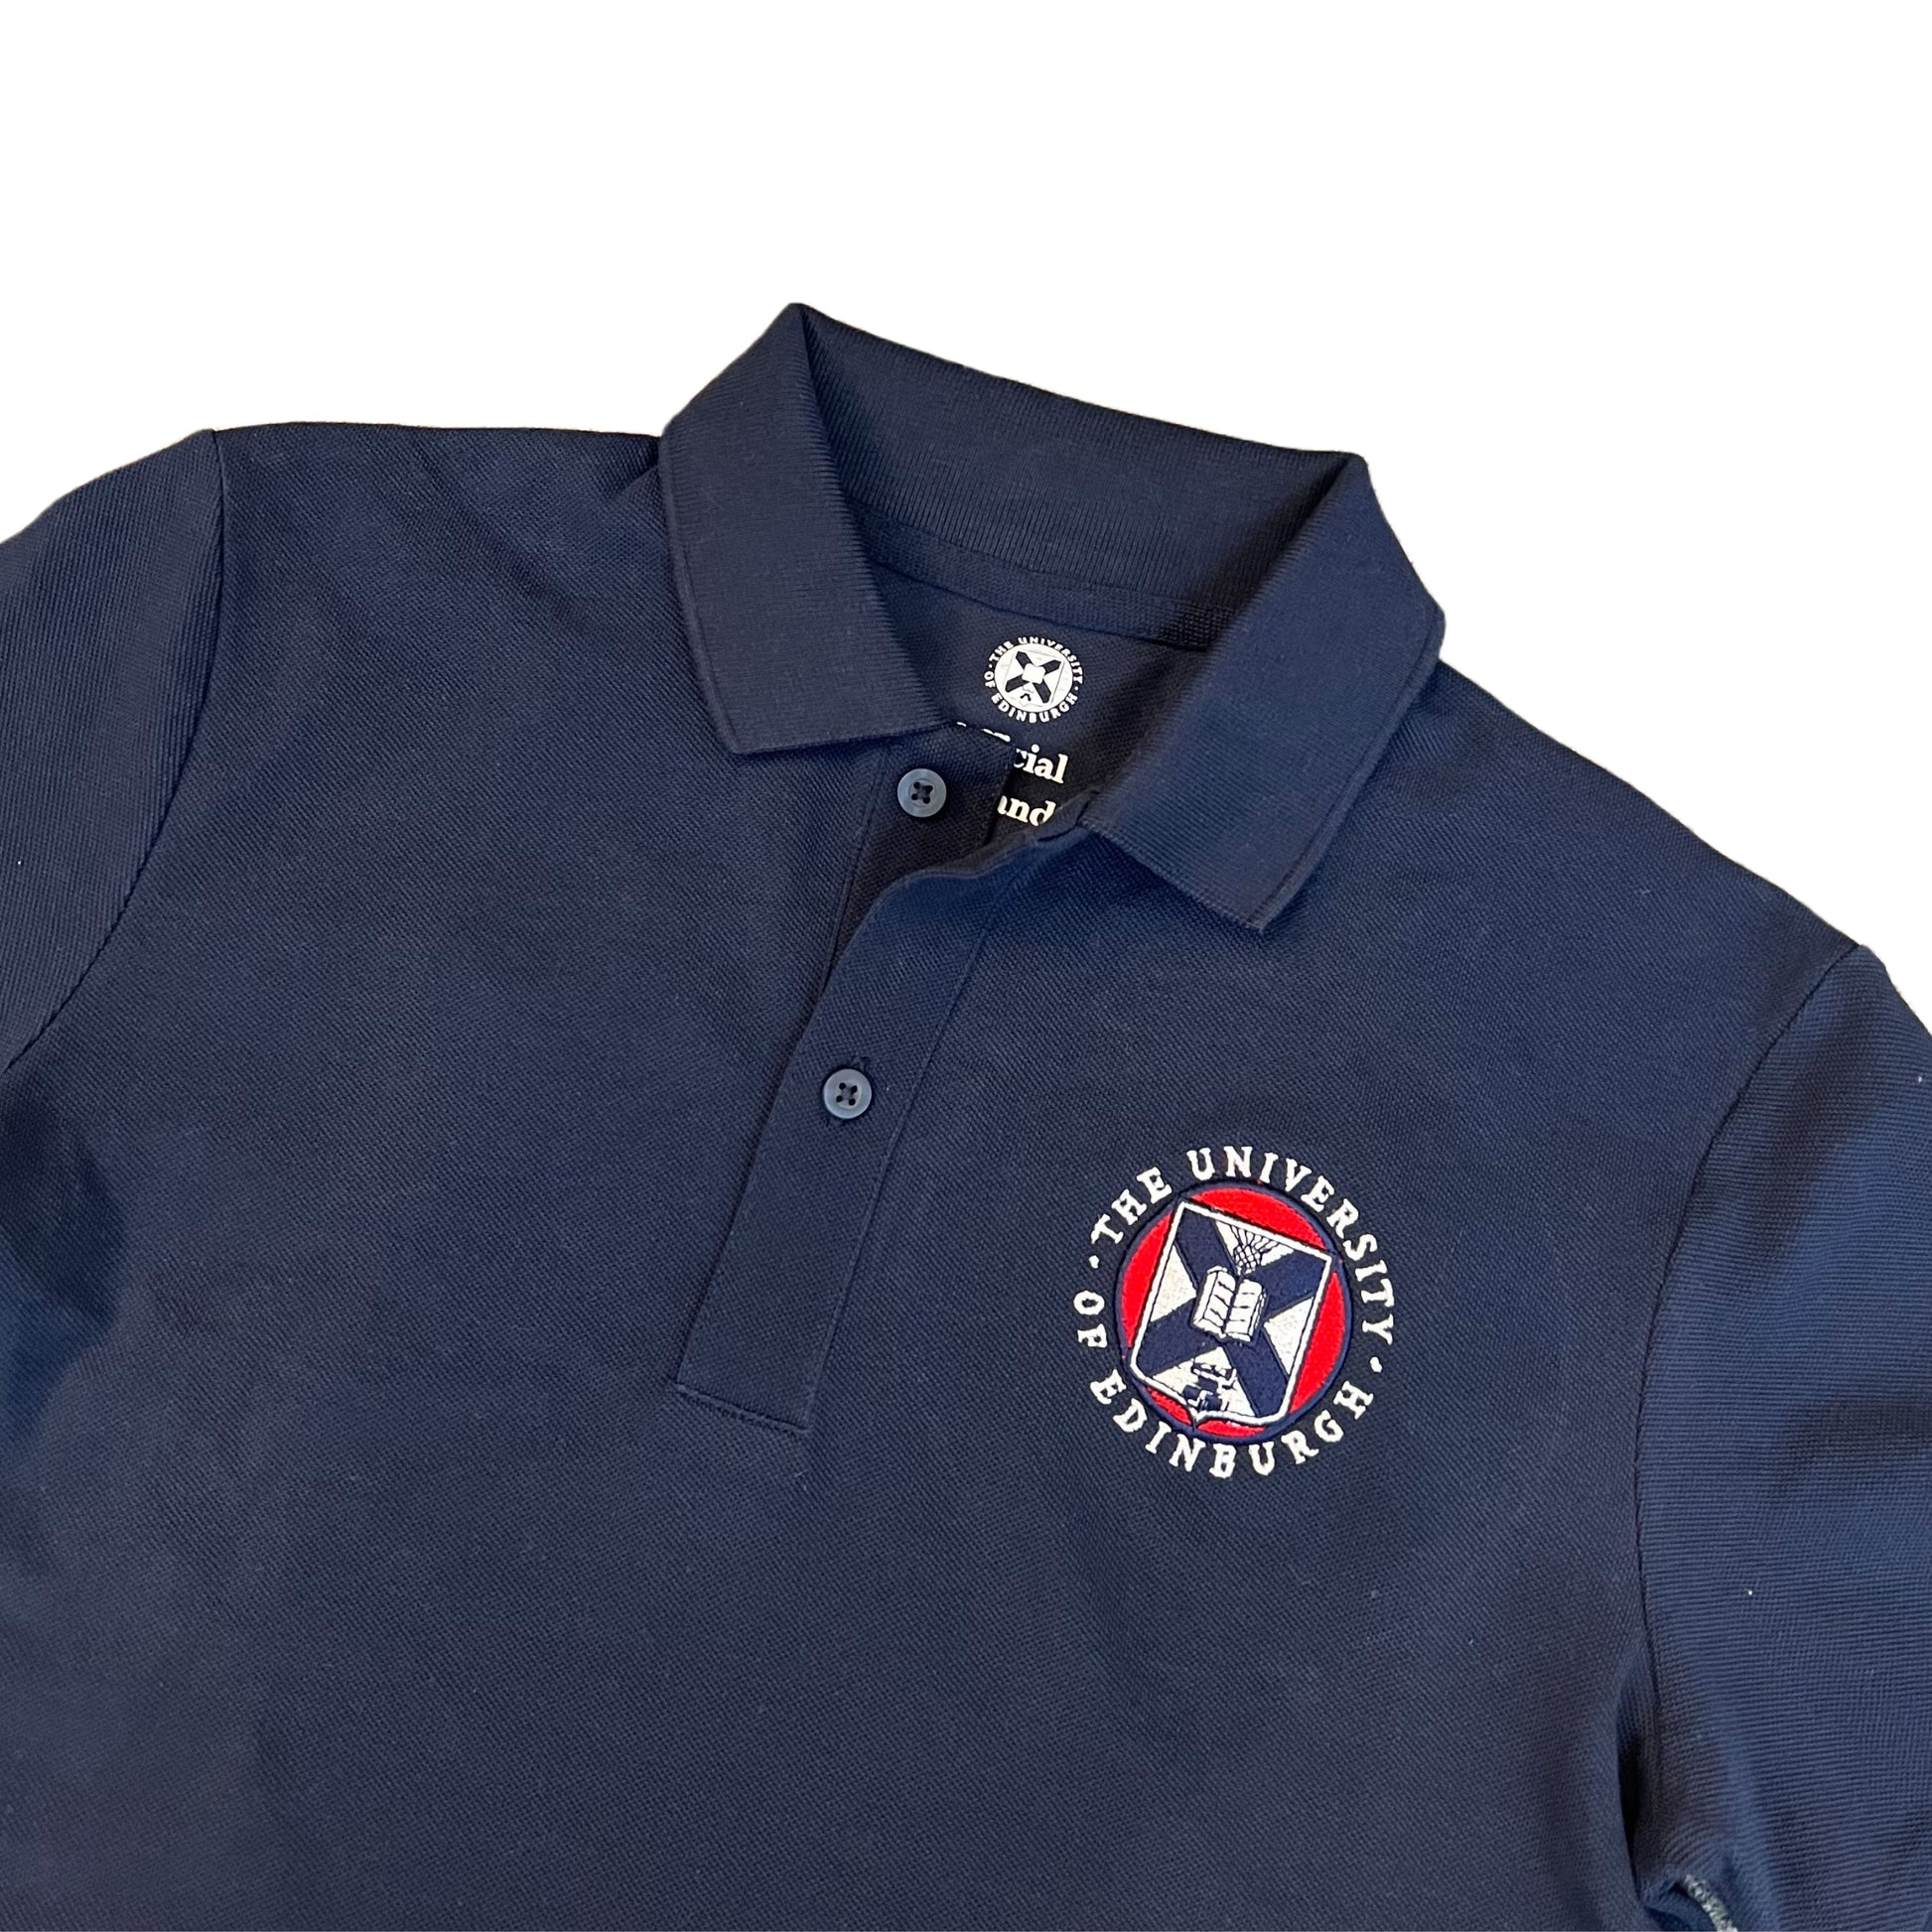 close up of navy polo with university crest embroidered in white, red and navy